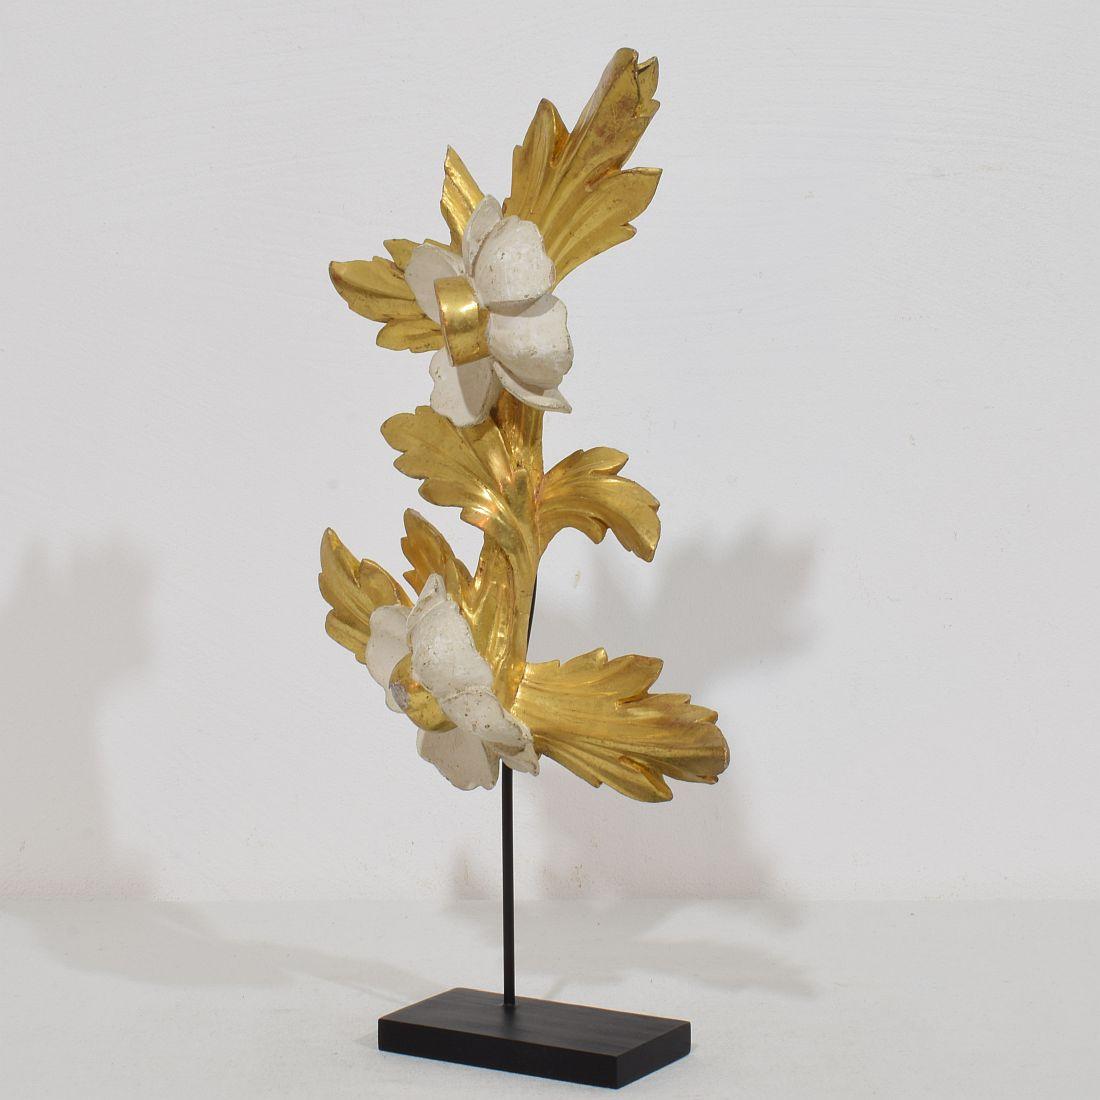 Beautiful handcarved giltwood floral ornament that once adorned a chapel .Original period piece that due it’s high age has a wonderful weathered look.
Italy circa 1780/1850 , weathered,small losses 
Measurements include the wooden base.
H:35cm 